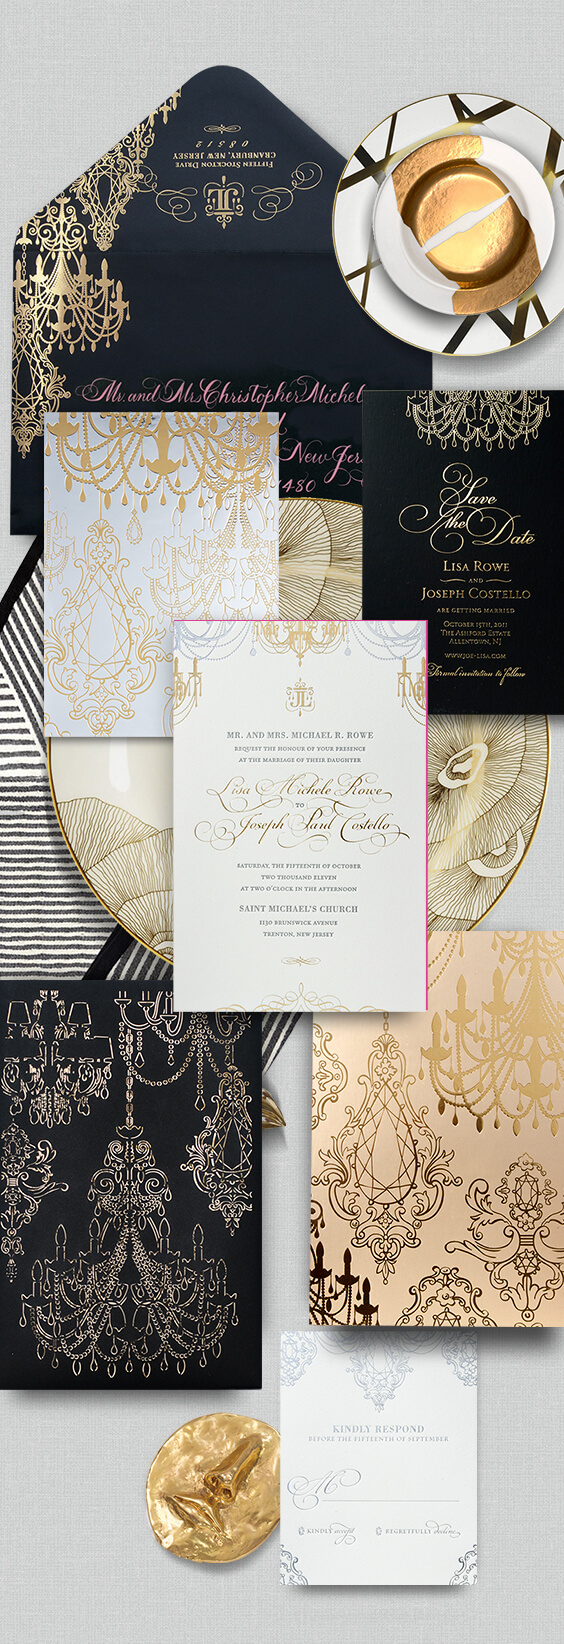 Glamorous chandelier wedding invitation with a laser cut sleeve